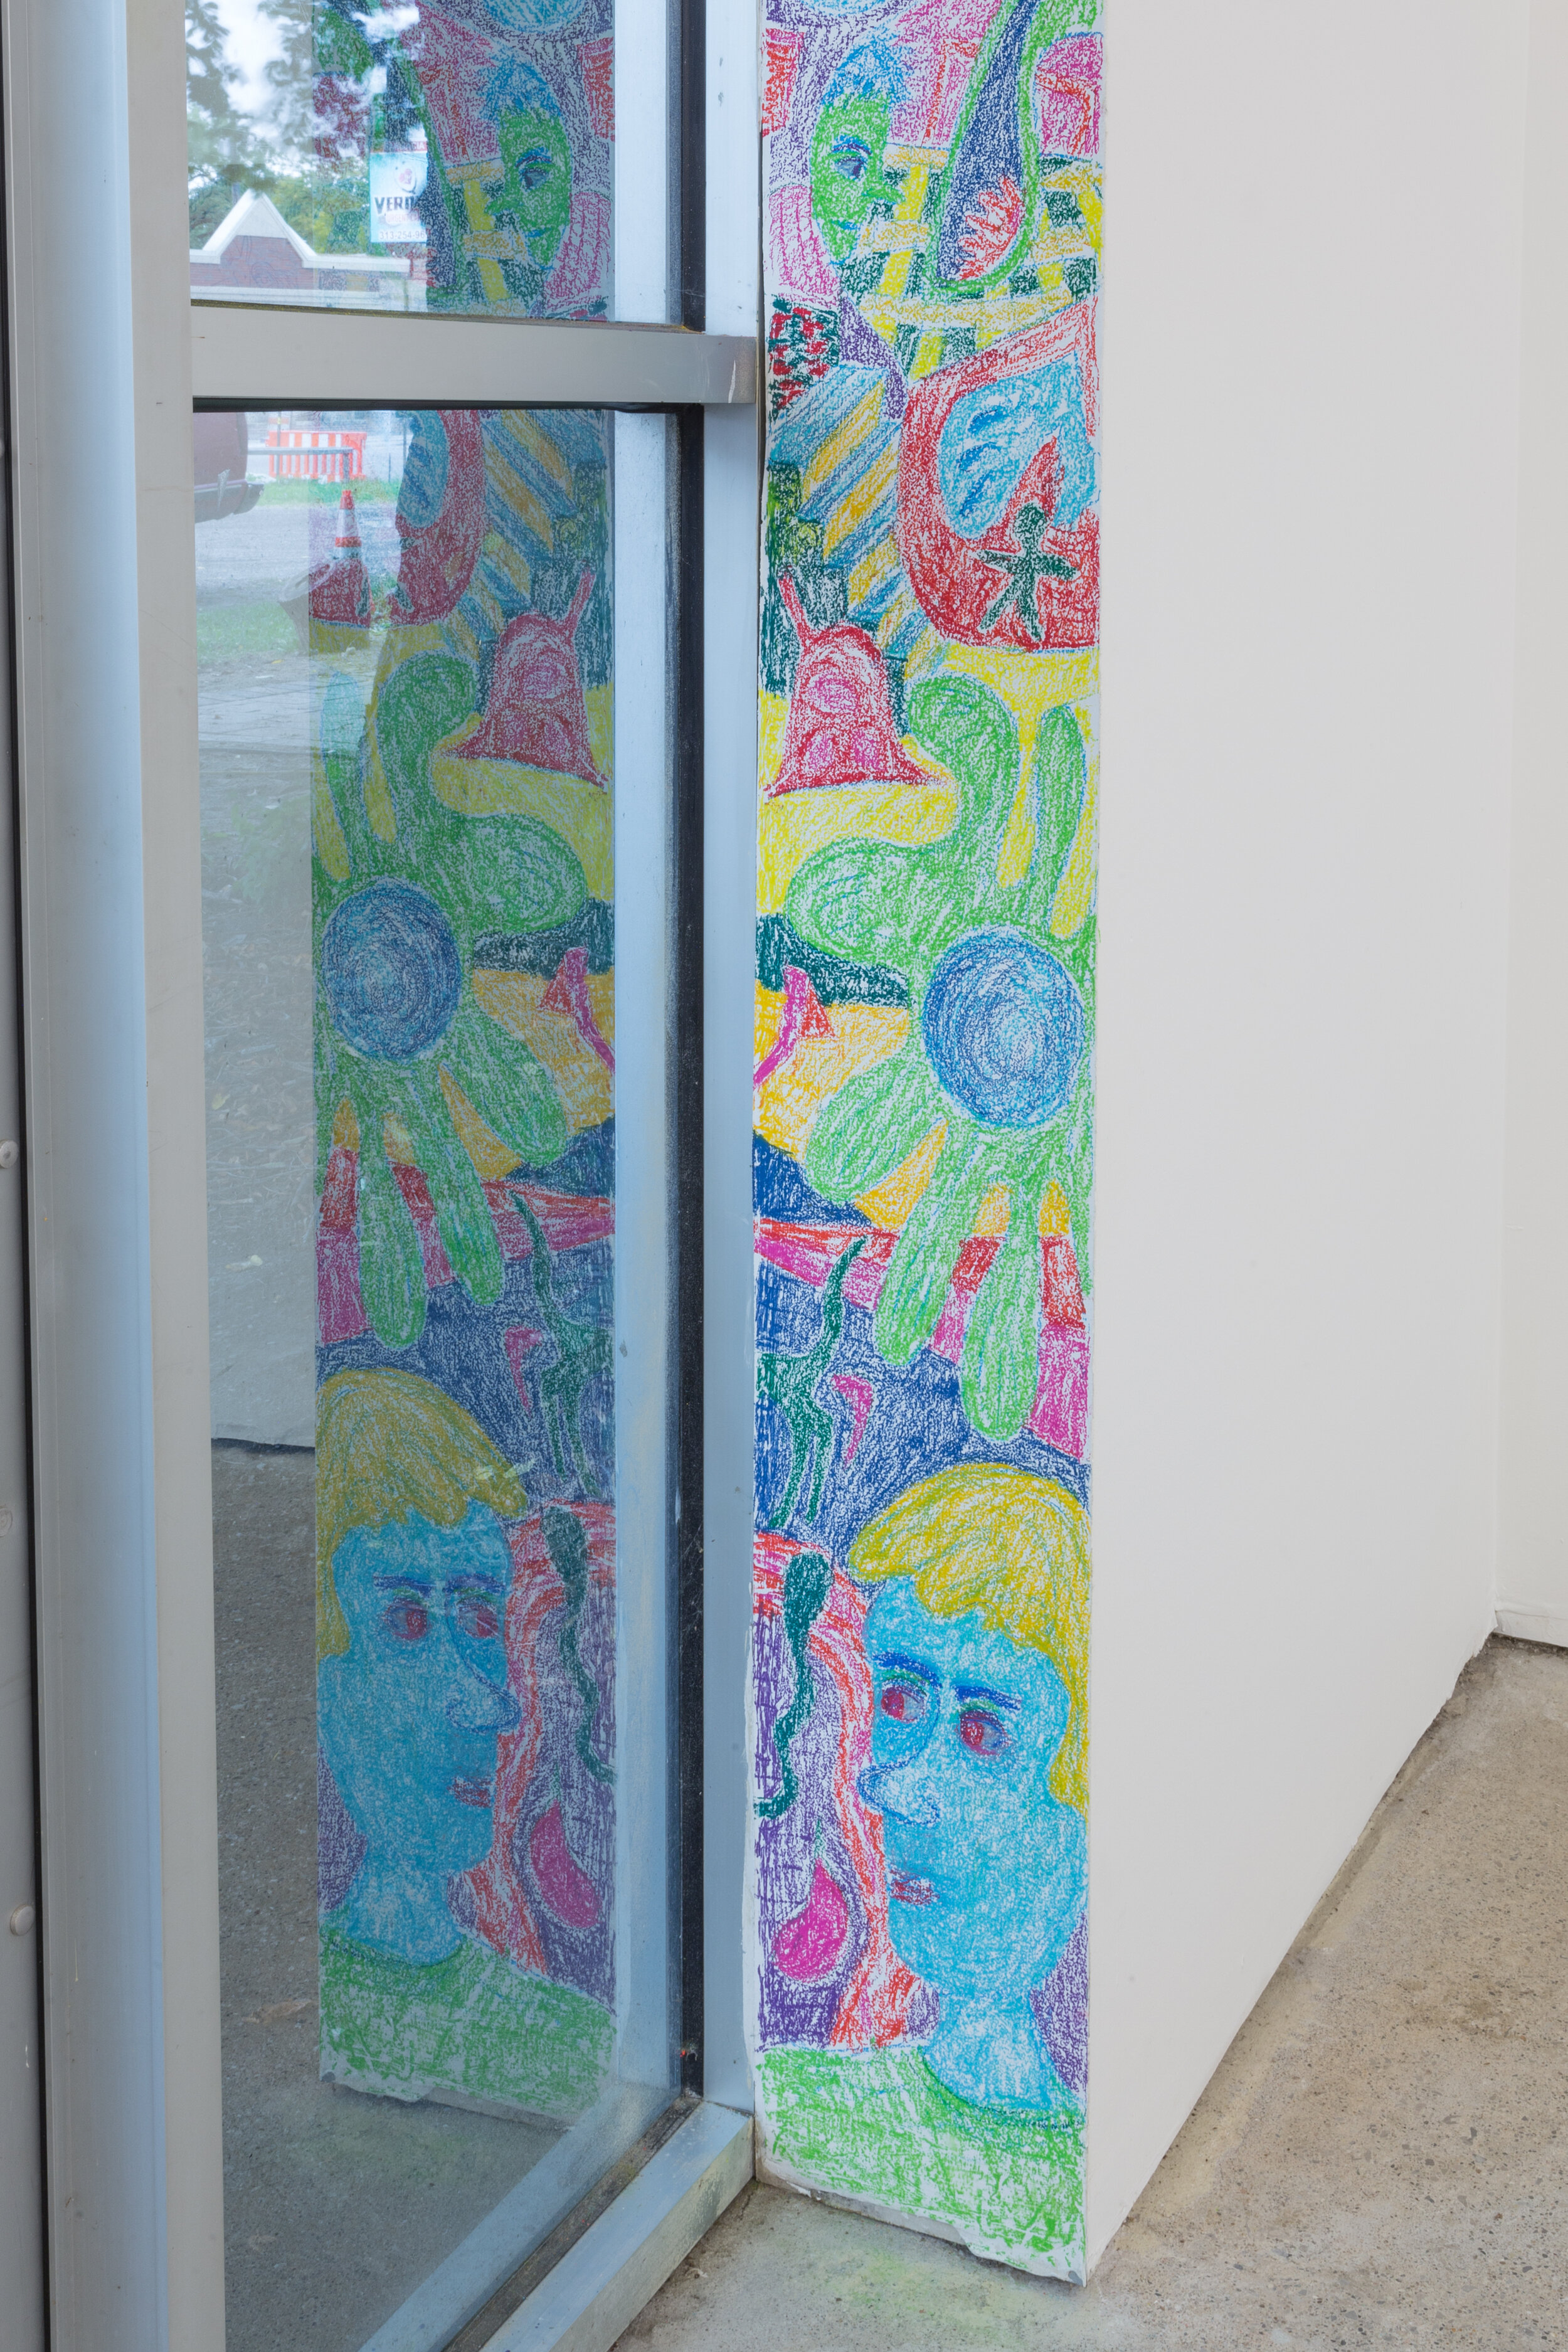  Wall drawing by Max Brand, installation view 